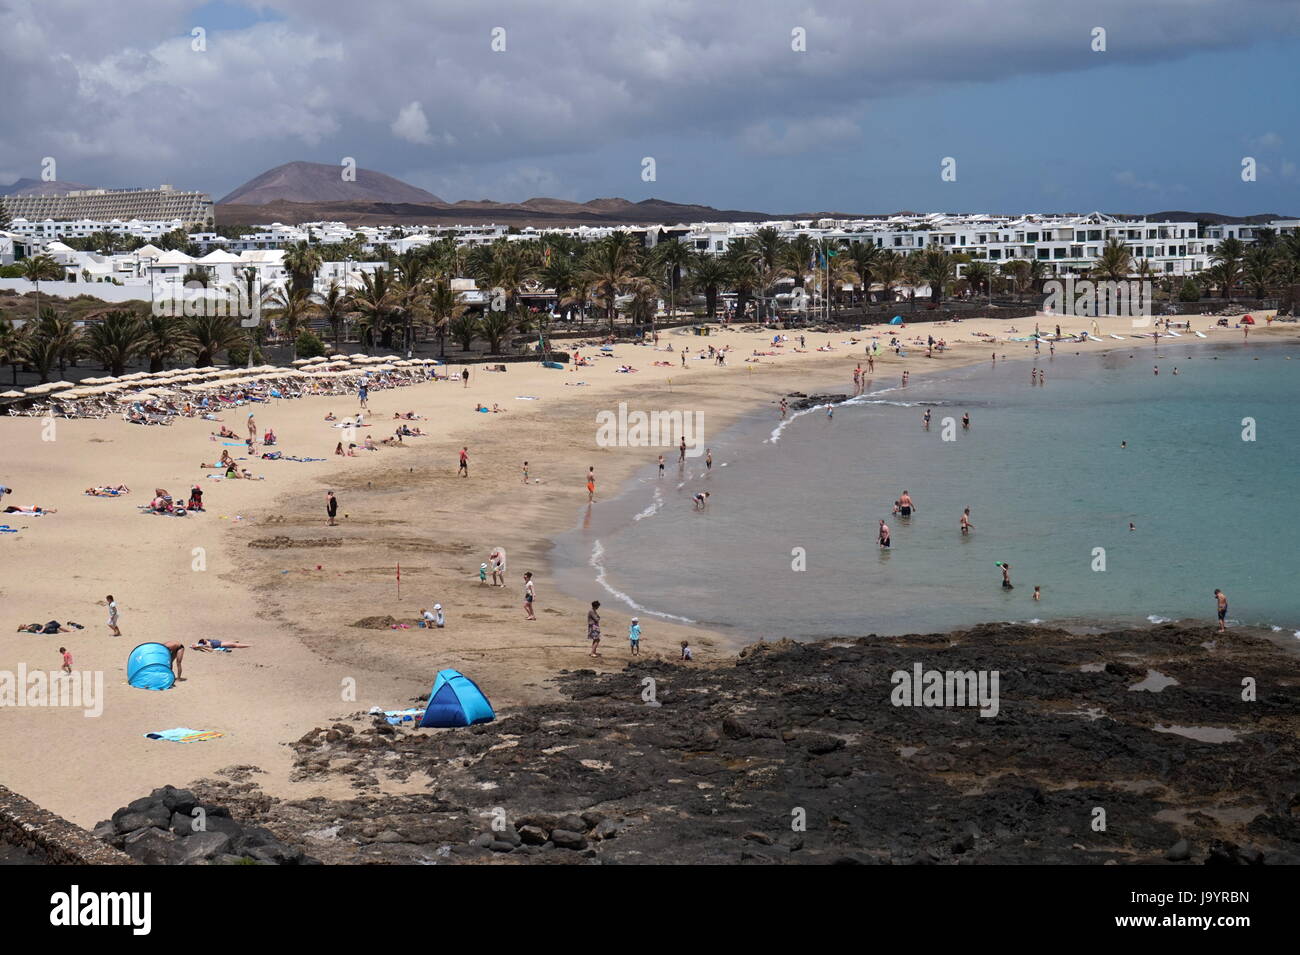 Holidaymakers on Playa las Cucharas, Costa Teguise, Lanzarote, Spain Stock Photo